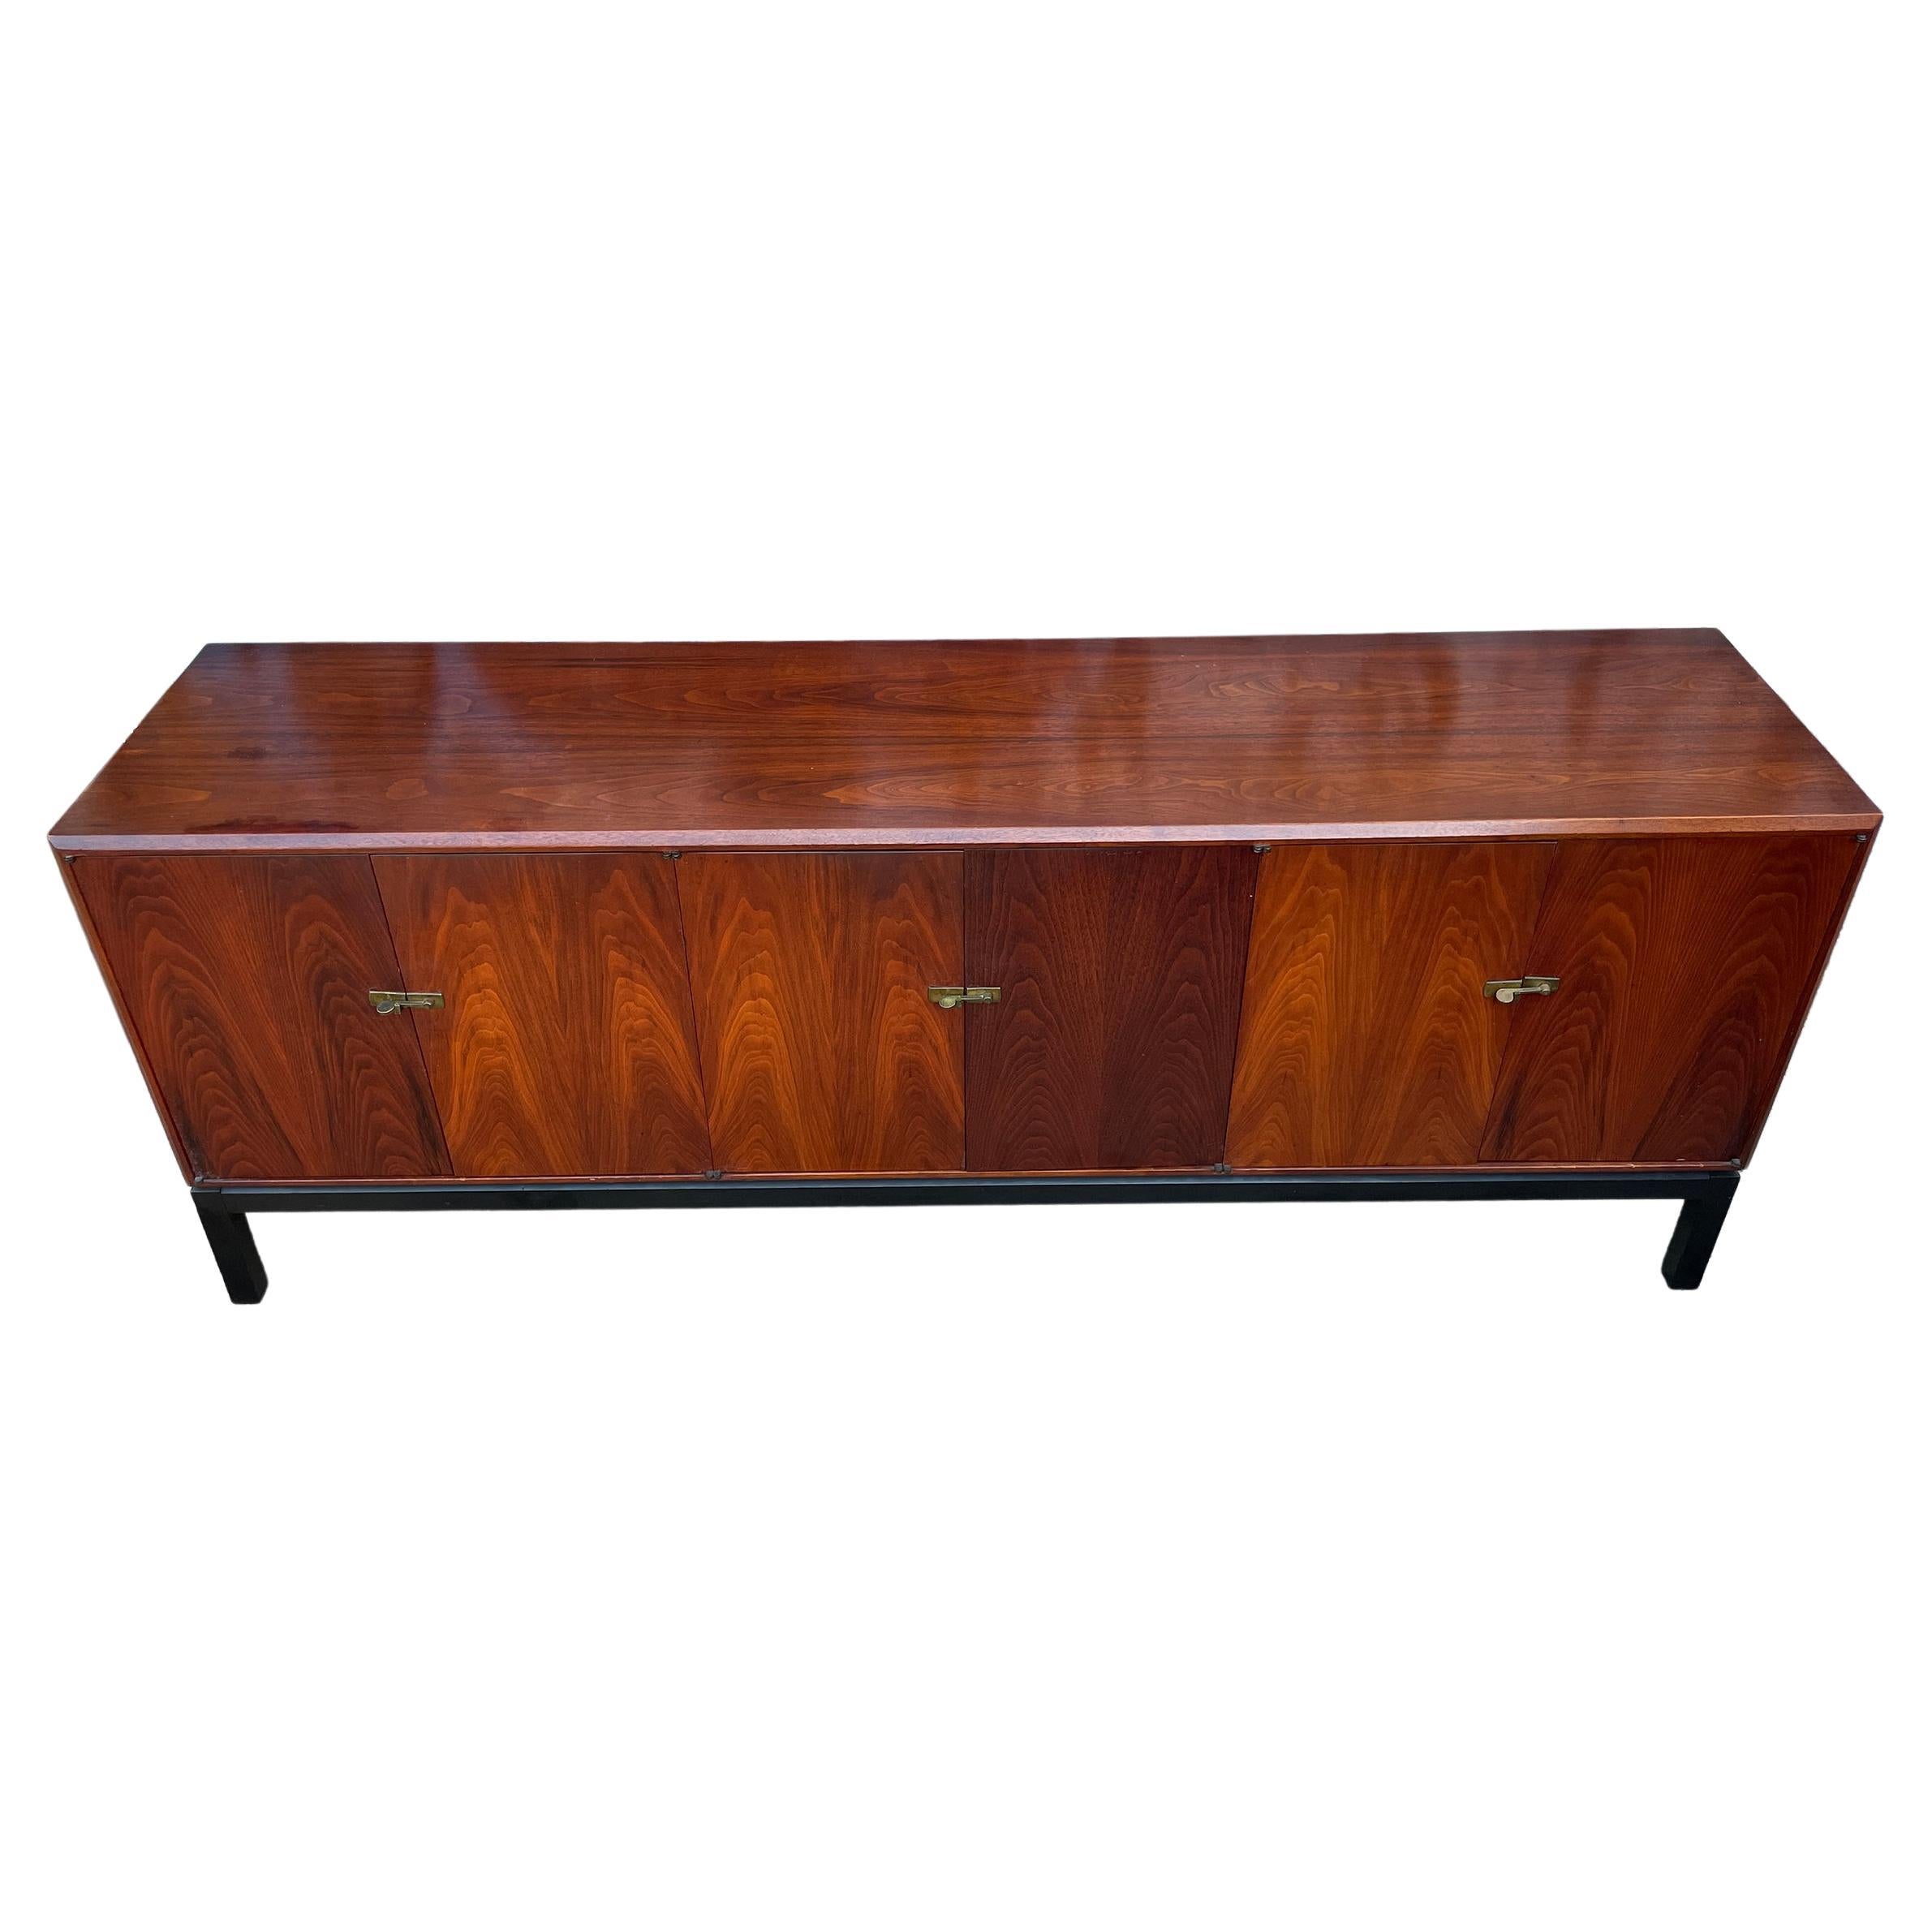 Mid-Century Modern 3 drawer - 6 door credenza in walnut. All Original Vintage condition - beautiful grain walnut doors and top. shows little wear - Solid brass flip handle locks. 3 drawers inside center All drawers slide smooth and clean inside.